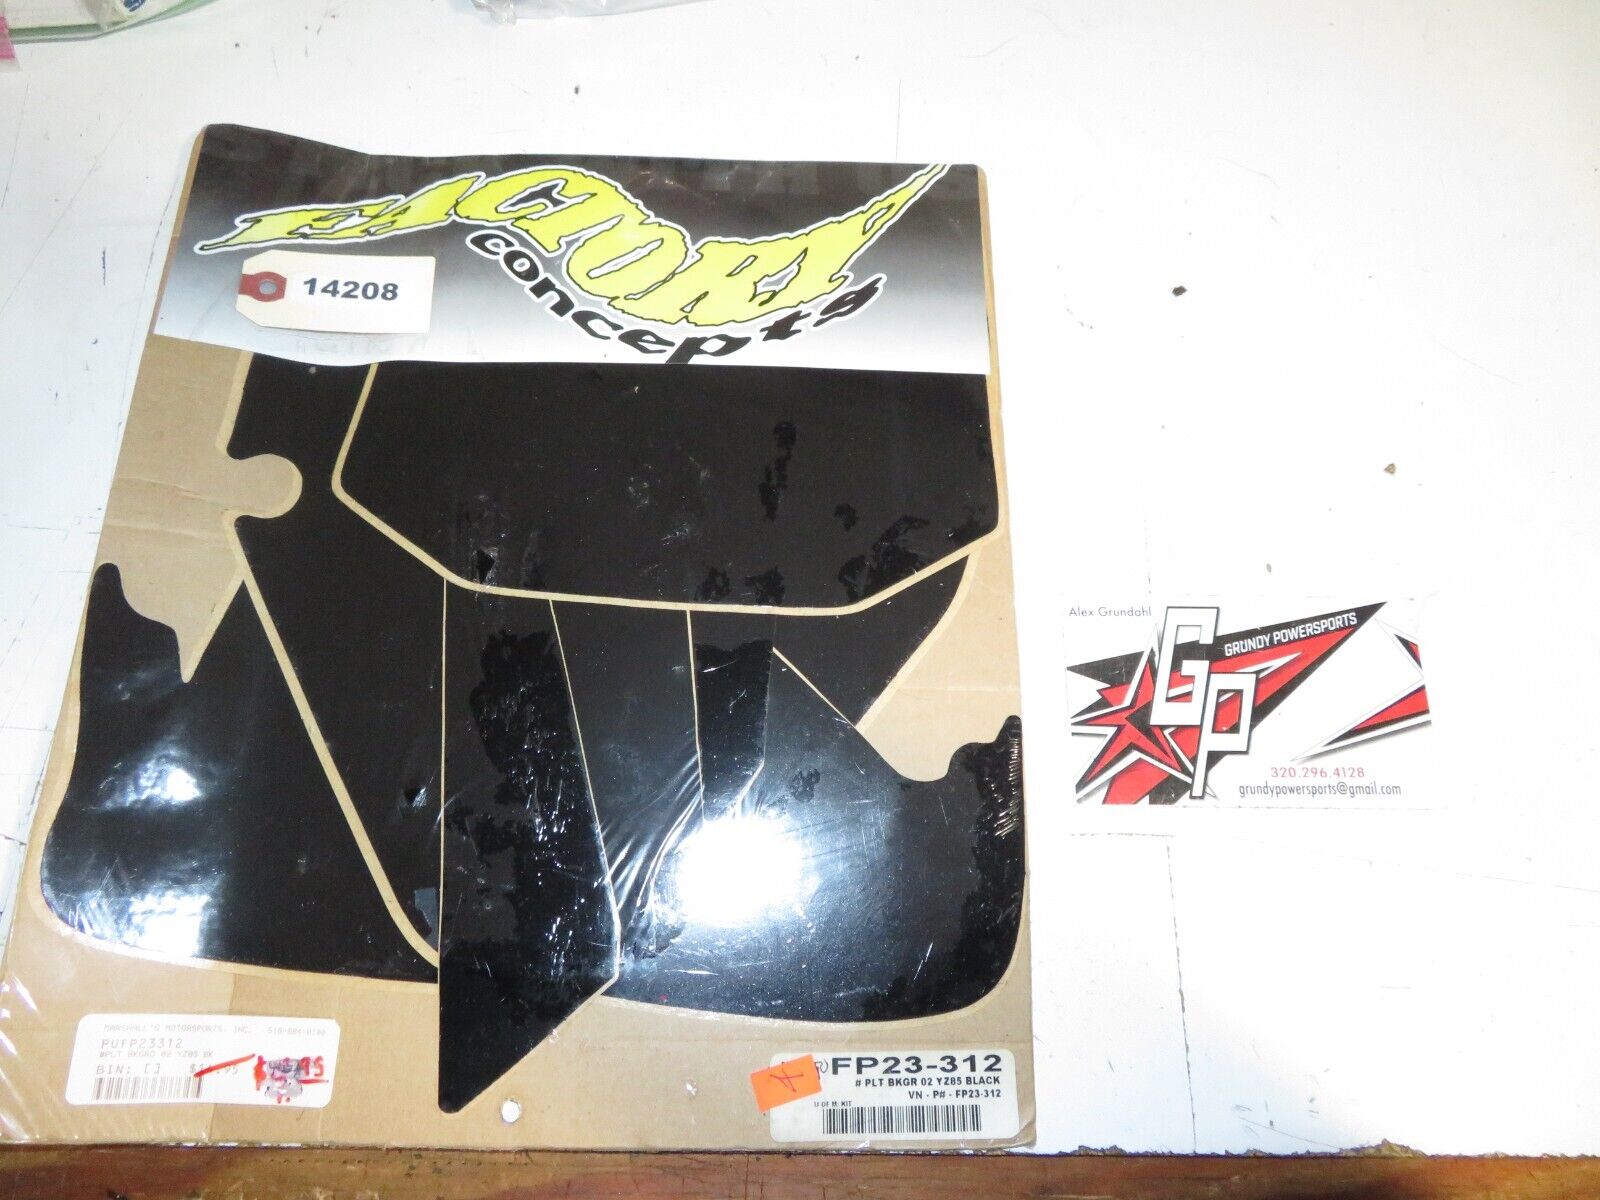 Factory Concepts - New NOS Black Background Decals 2002 YZ 85 Qty 1 - FP23-312